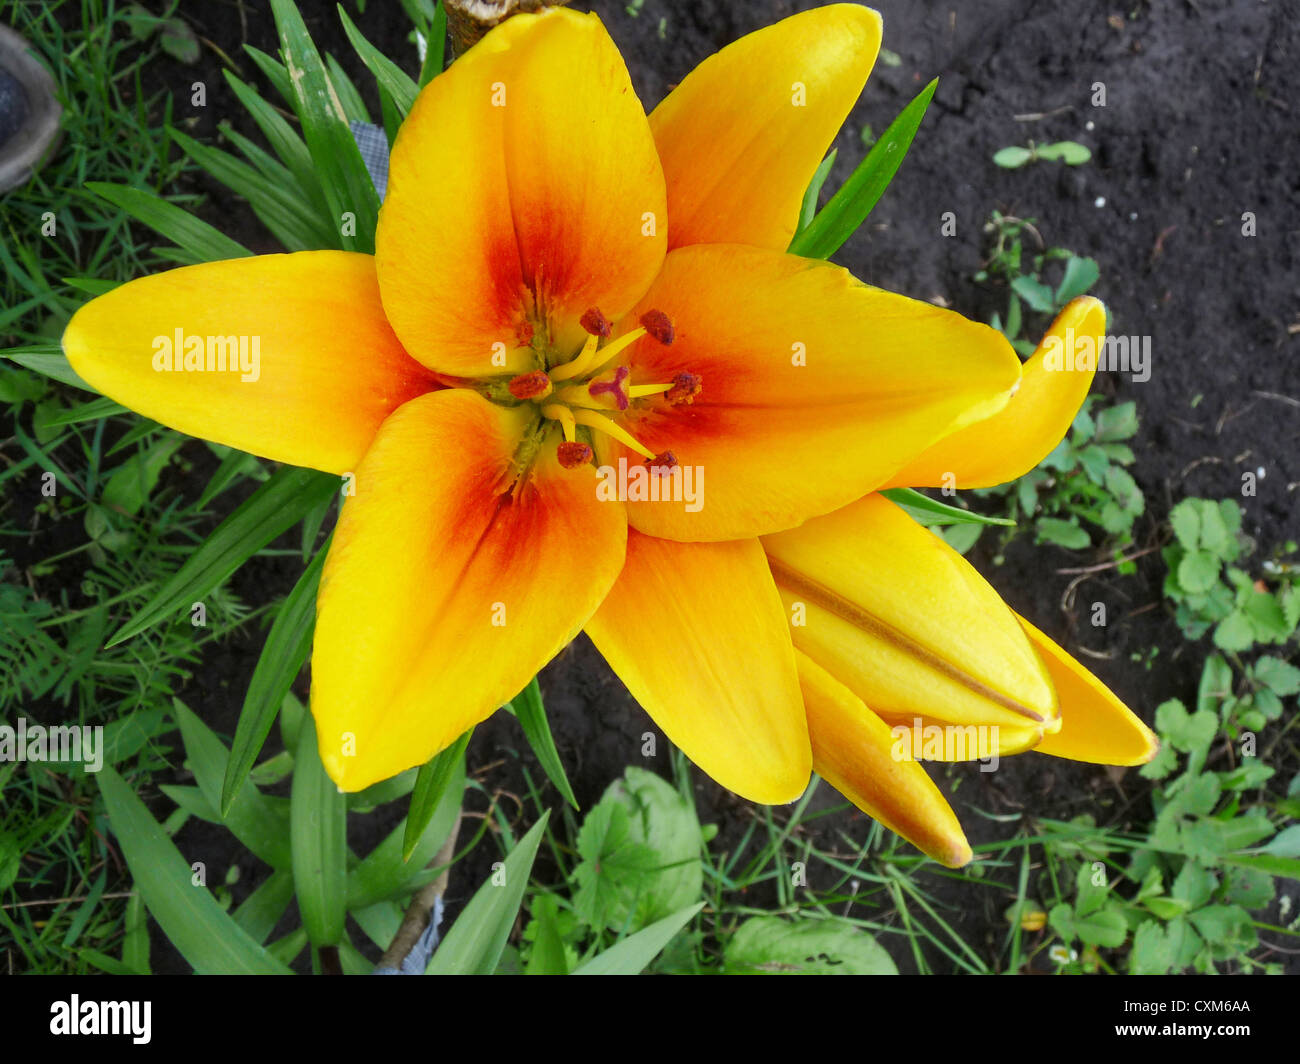 lily, flower, wildlife, yellow, stamens and pistils, petals,plant, flower bed Stock Photo